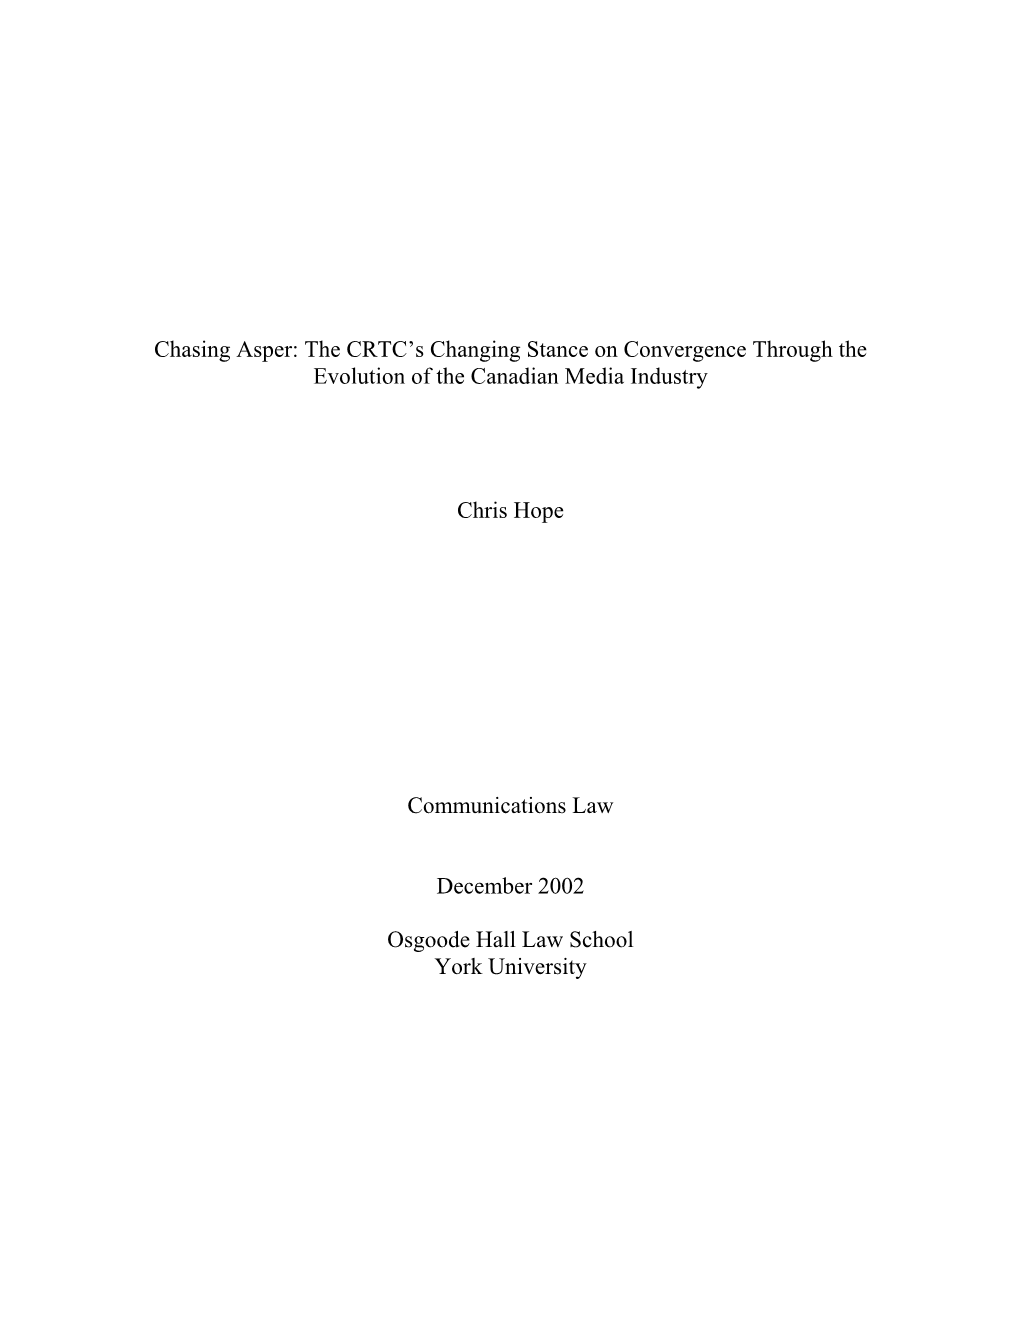 Chasing Asper: the CRTC's Changing Stance on Convergence